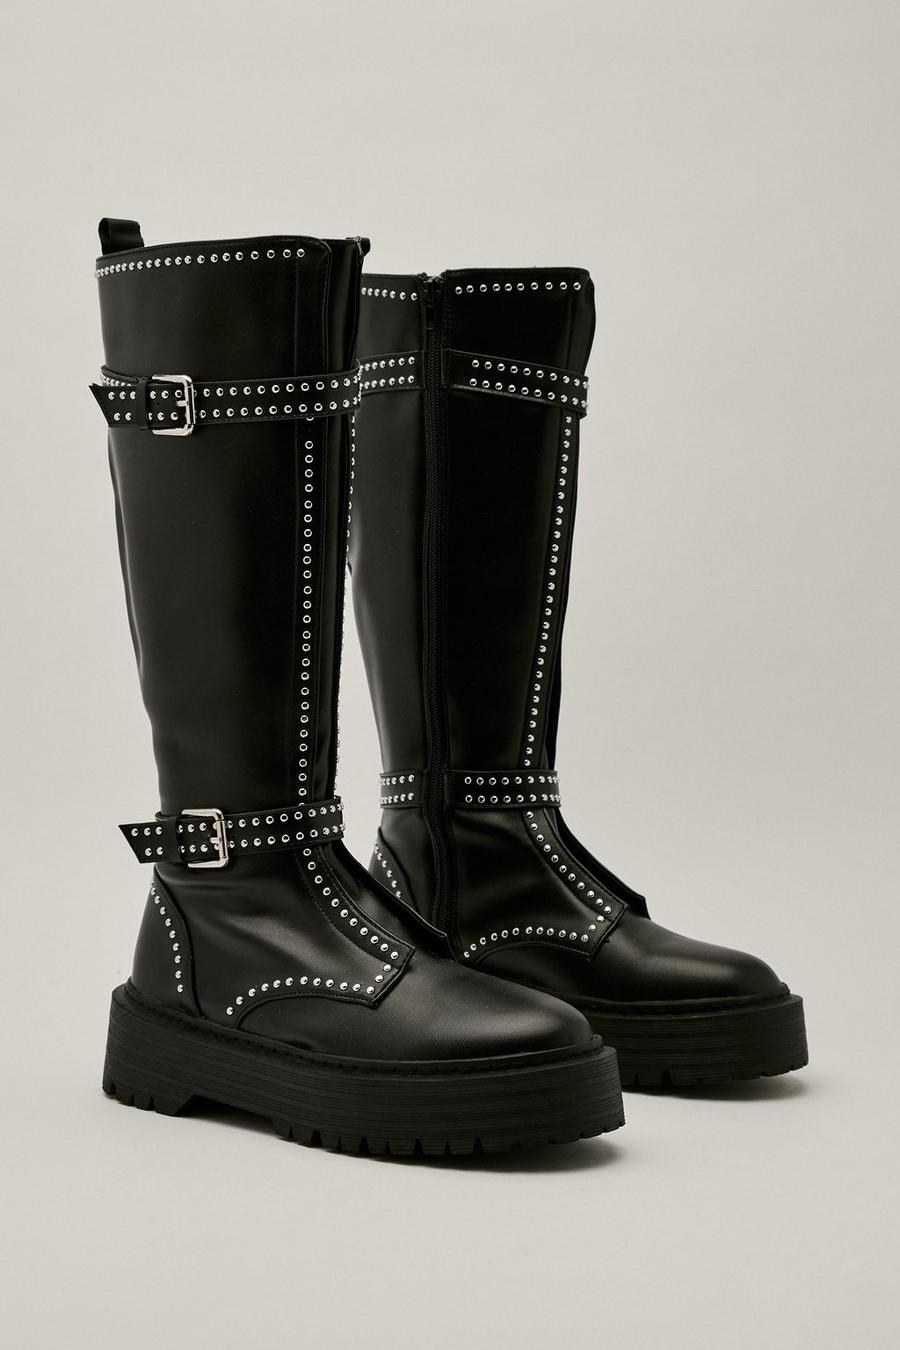 Faux Leather Double Buckle Studded Calf High Boots